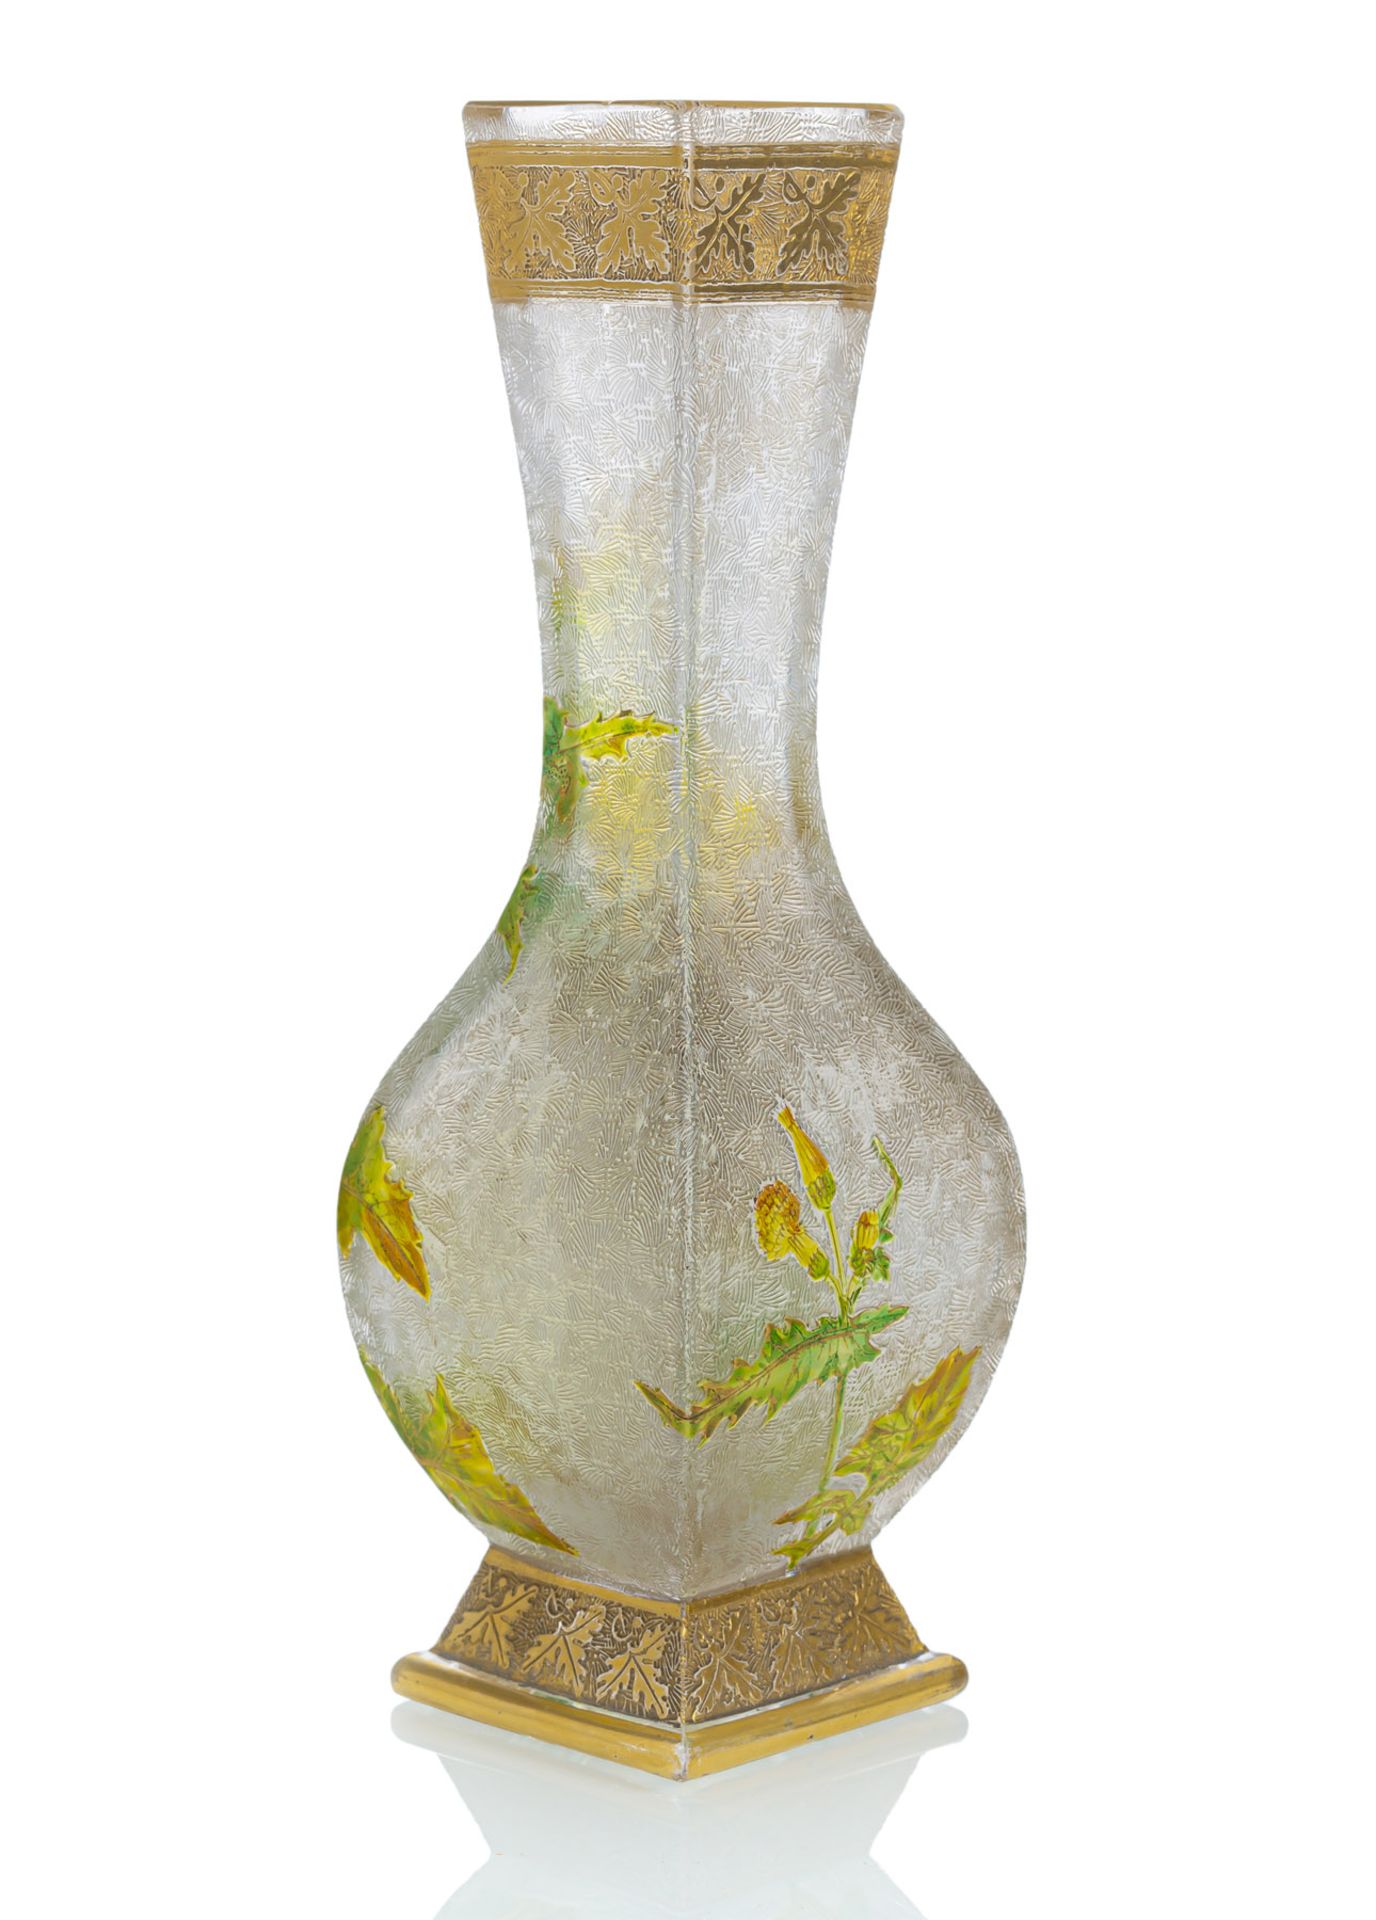 Vase with thistle decoration - Image 2 of 2